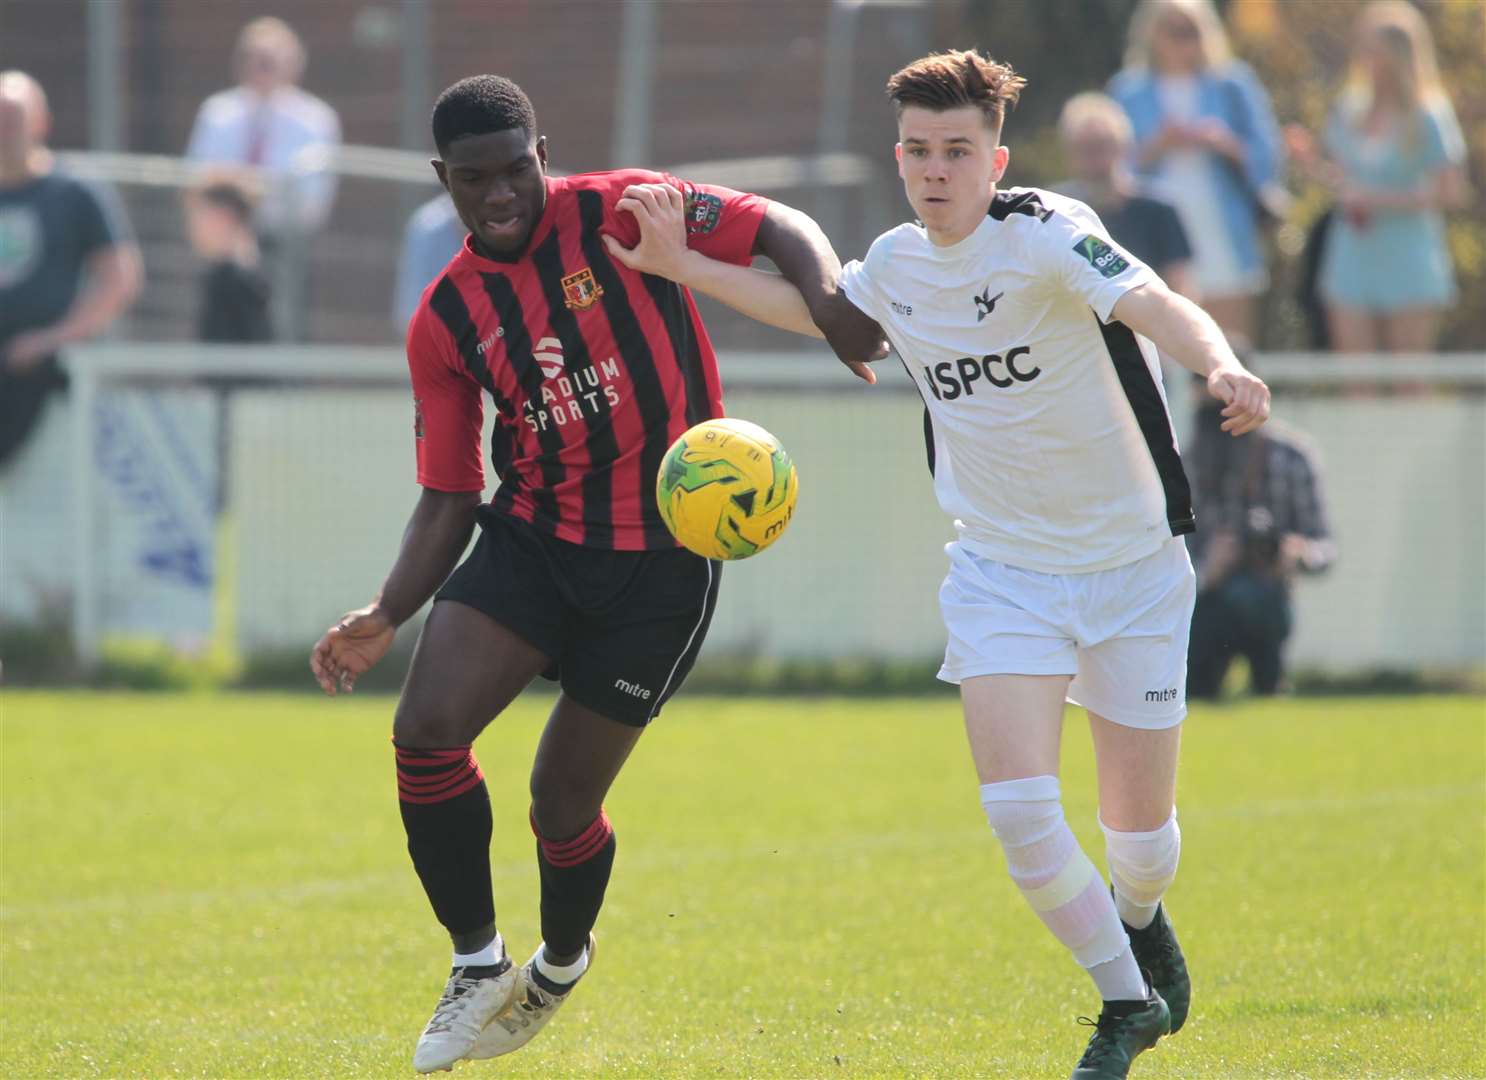 David Smith (left) has signed for Ashford Picture by: John Westhrop